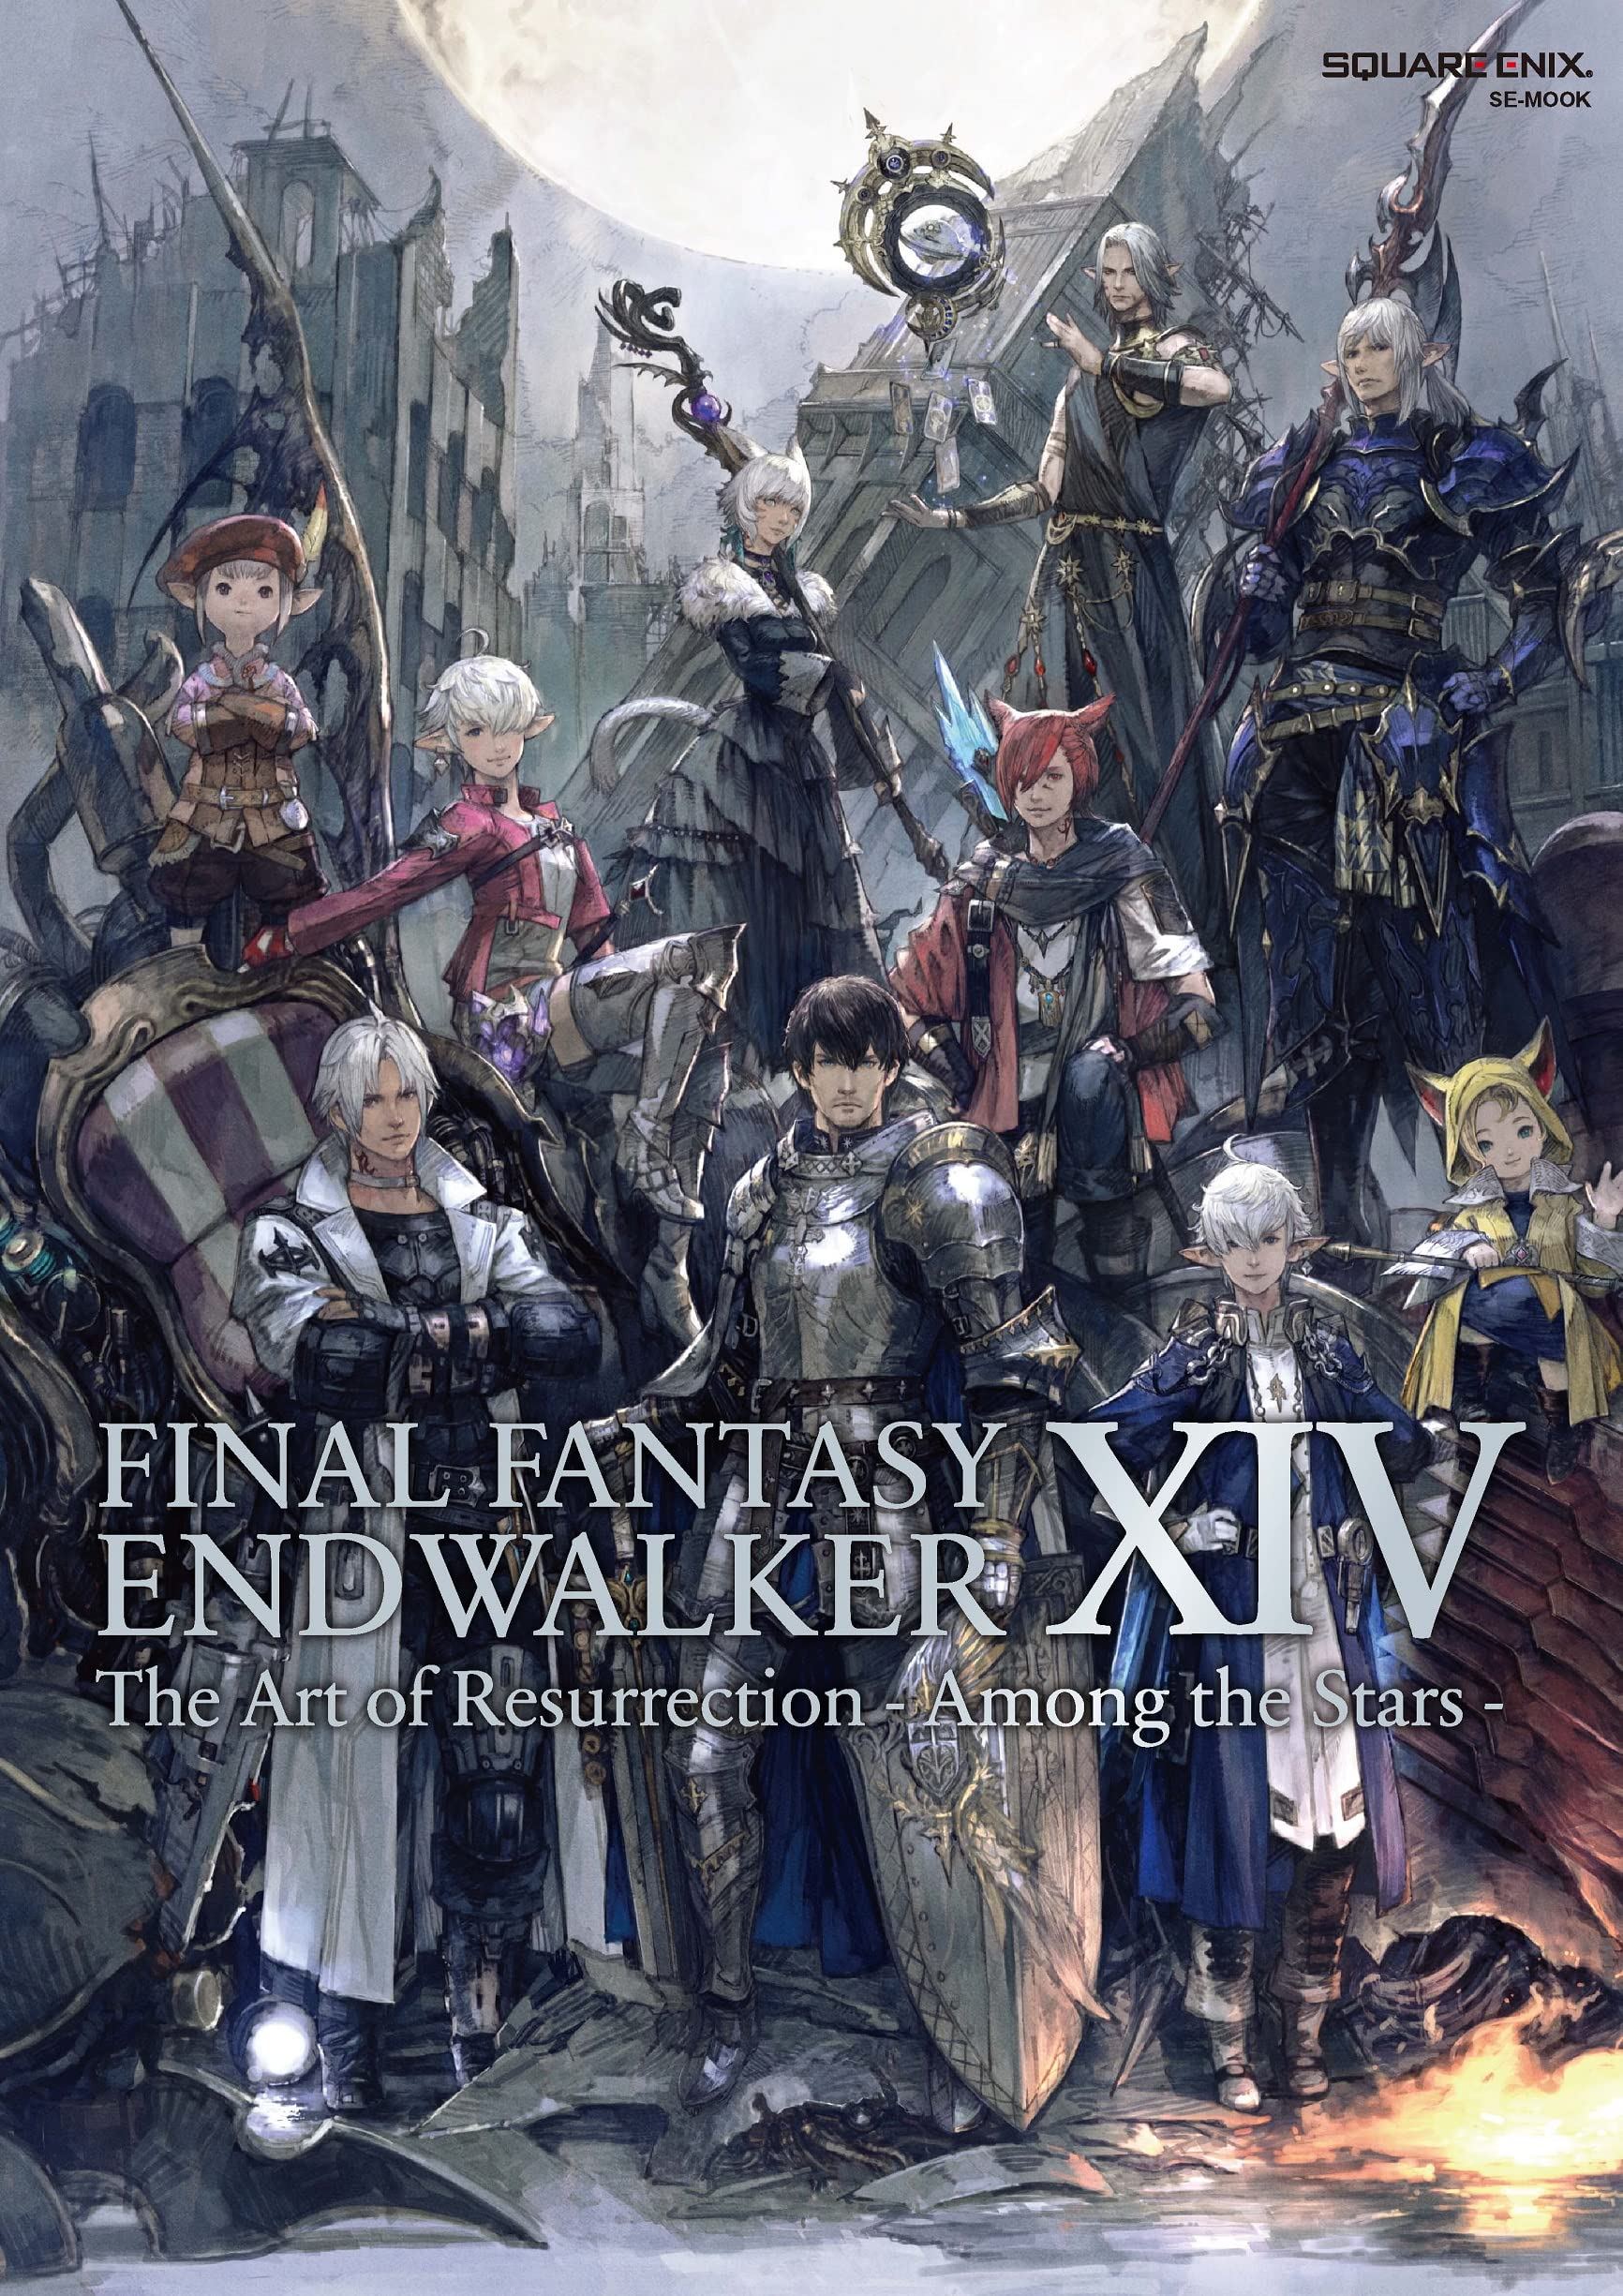 Final Fantasy XIV A Realm Reborn The Art of Eorzea Another Dawn Artbook